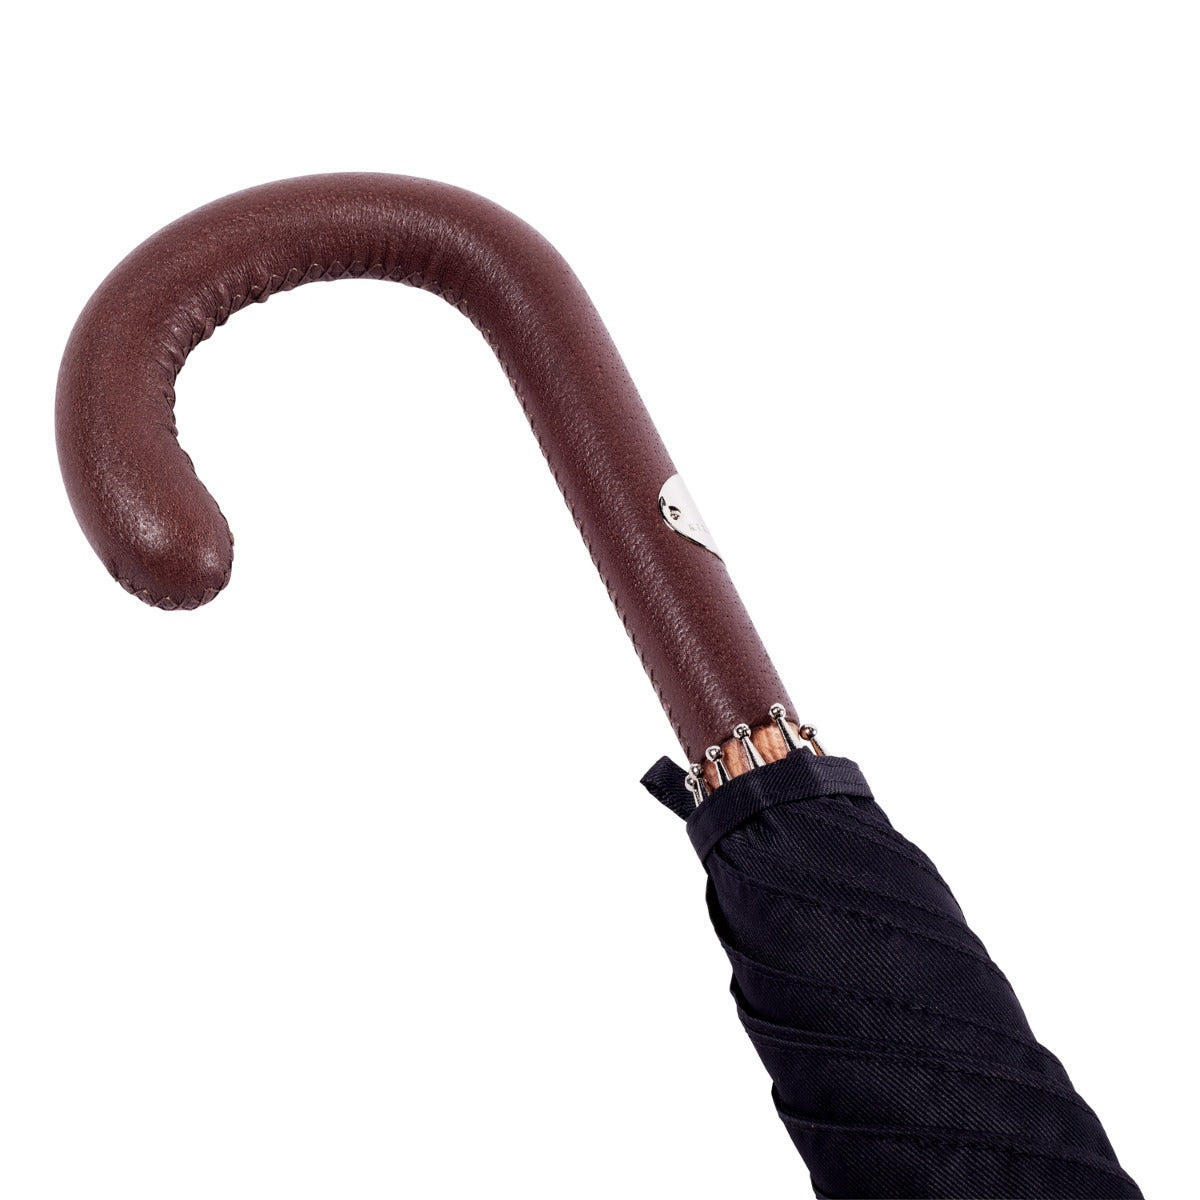 A Brown Pigskin Solid Stick Umbrella with Black Canopy, sourced from Milan, Italy and sold by KirbyAllison.com.